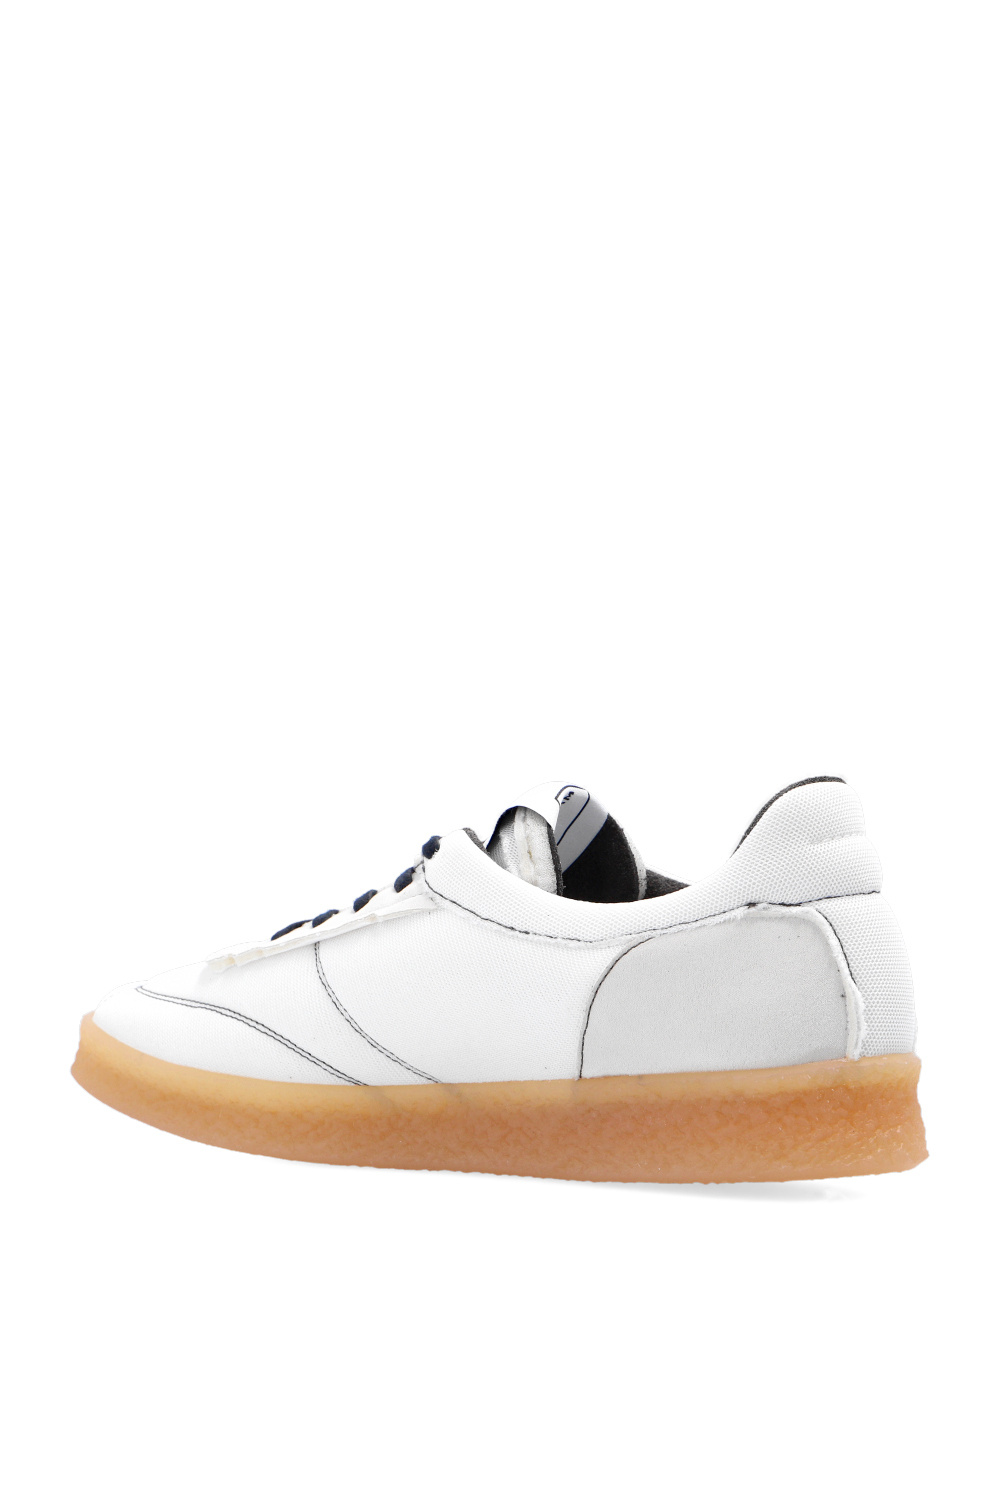 MM6 Maison Margiela Logo-patched sneakers